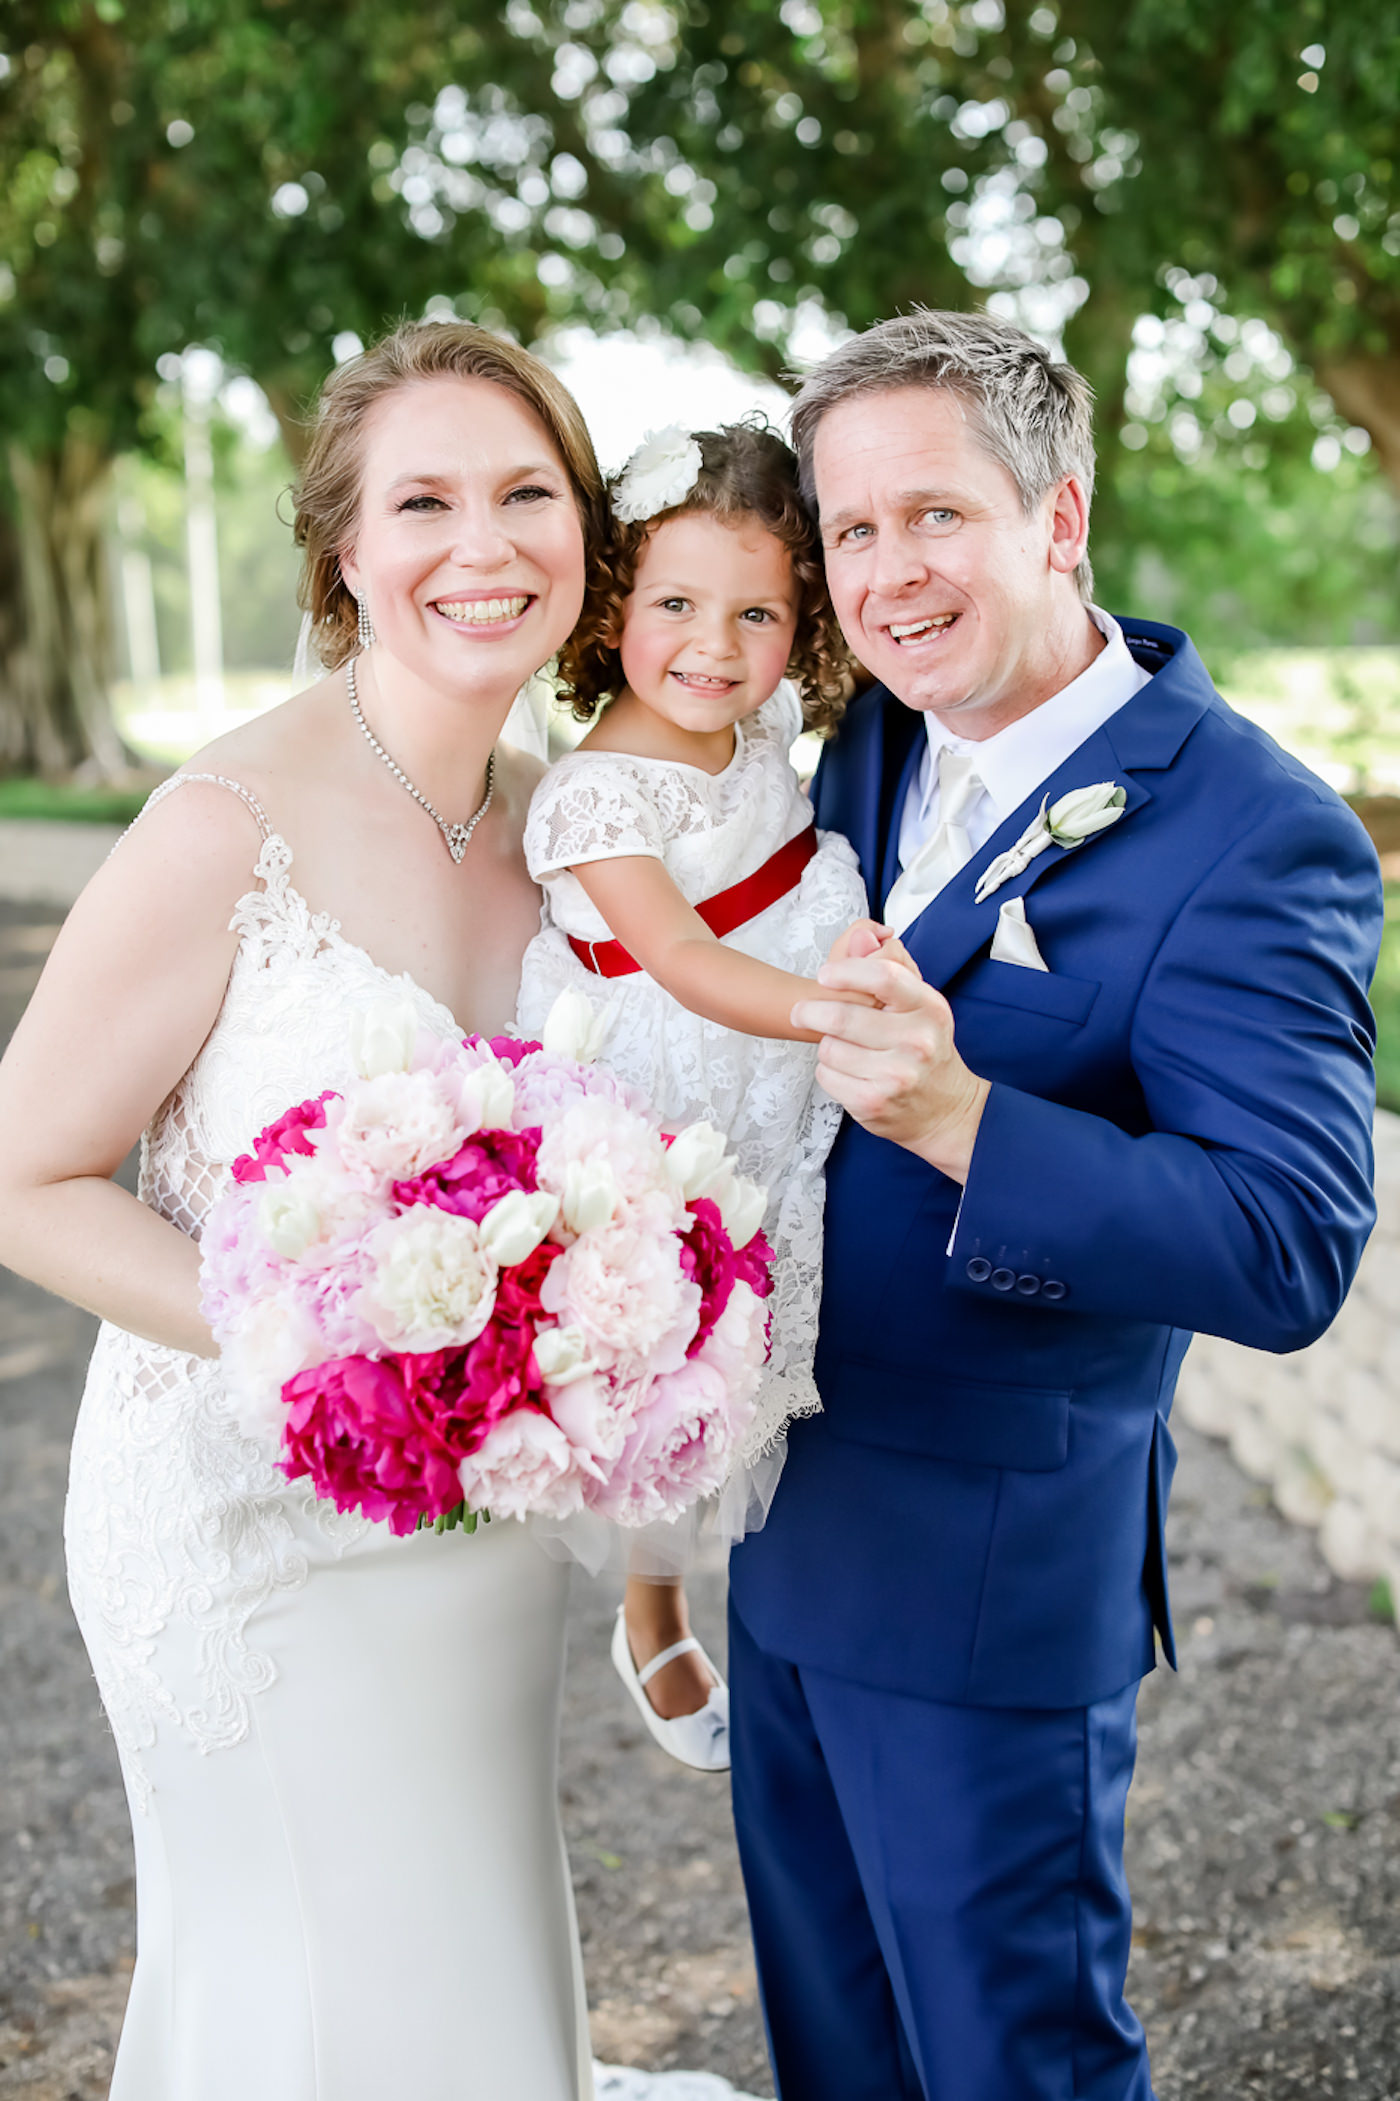 Bride in Fitted Lace with Skinny Straps Stella York Wedding Dress Holding Pink, Blush Pink and White Floral Bouquet, Flower Girl in White Dress with Red Ribbon Belt, Groom in Blue Suit | Tampa Bay Wedding Photographer Lifelong Photography Studios | Wedding Hair and Makeup Michele Renee the Studio